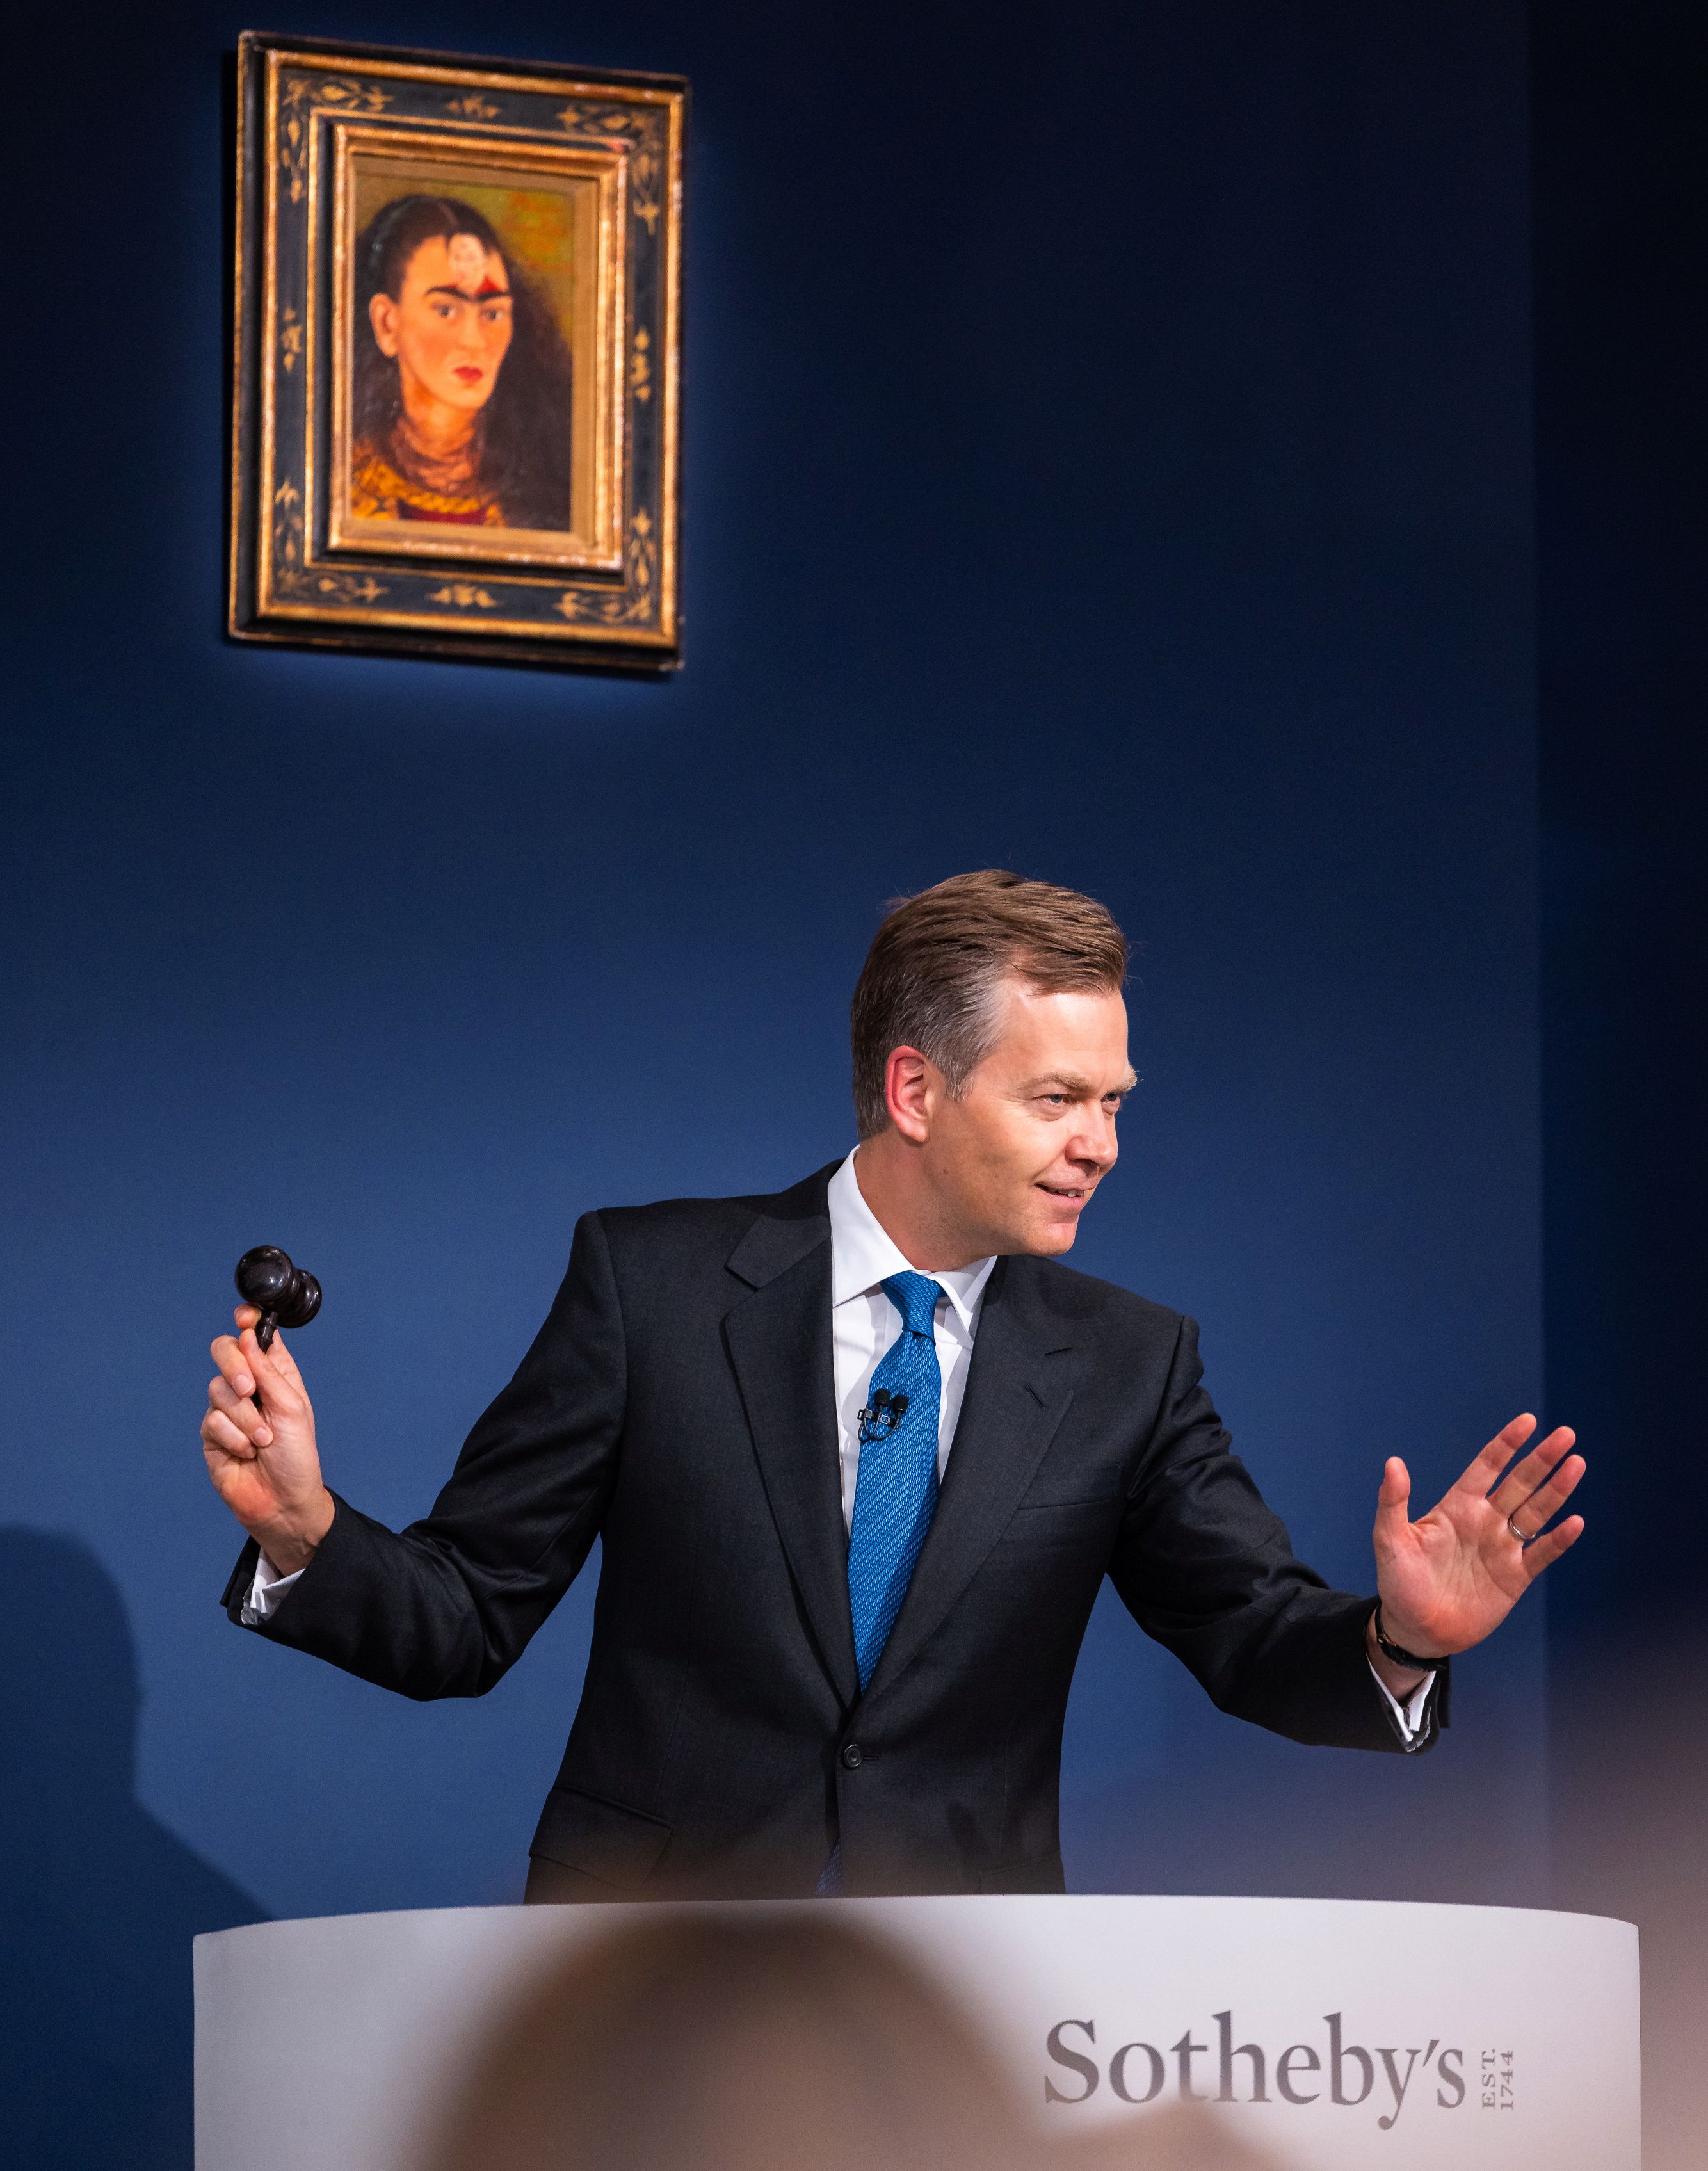 Auctioneer Oliver Barker, Chairman of Sotheby's Europe, sells a Frida Kahlo self portrait for $34.9 Million USD during an art auction, in the Manhattan borough of New York City, New York, U.S., November 16, 2021.  Julian Cassady/SOTHEBY'S/Handout via REUTERS